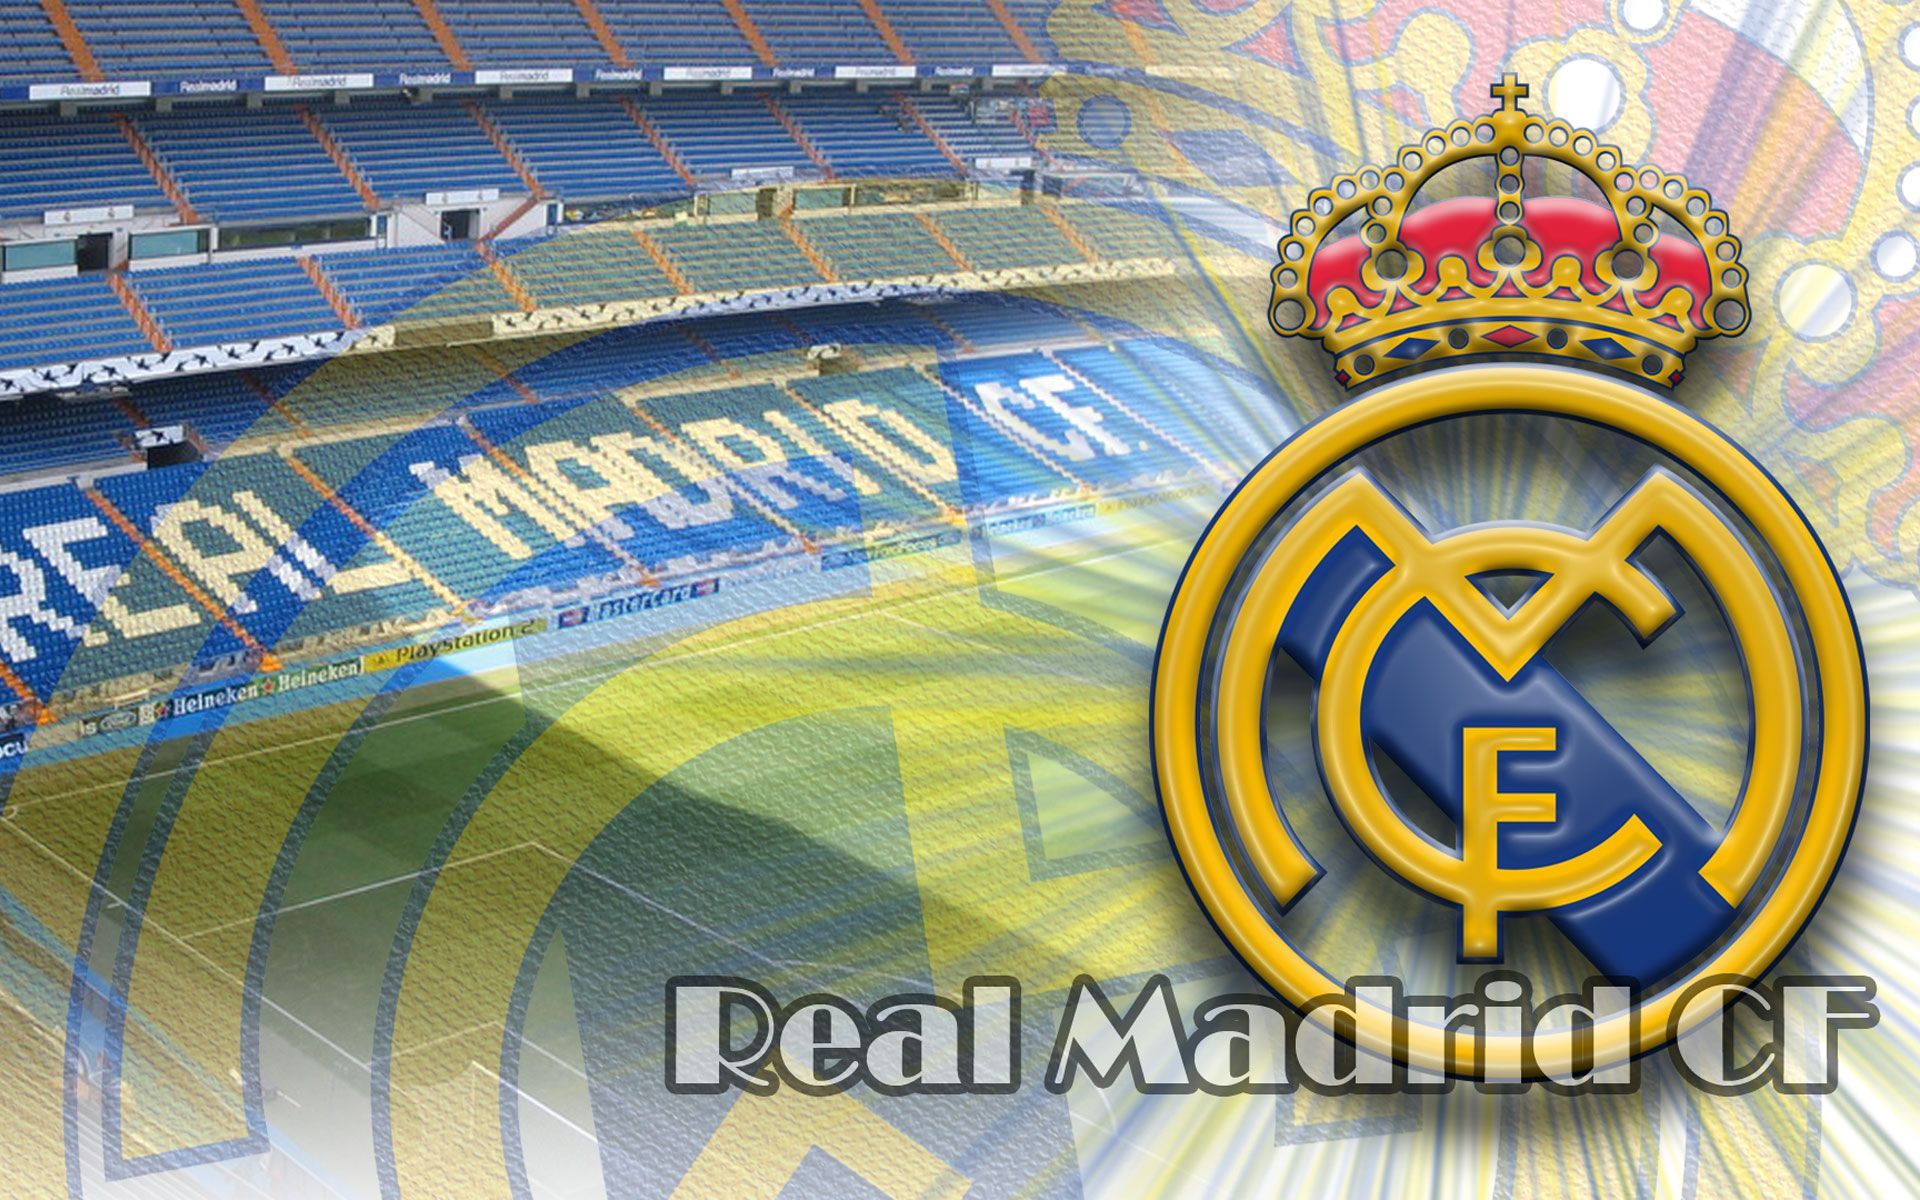 Real Madrid Wallpaper HD free download | Wallpapers, Backgrounds ...